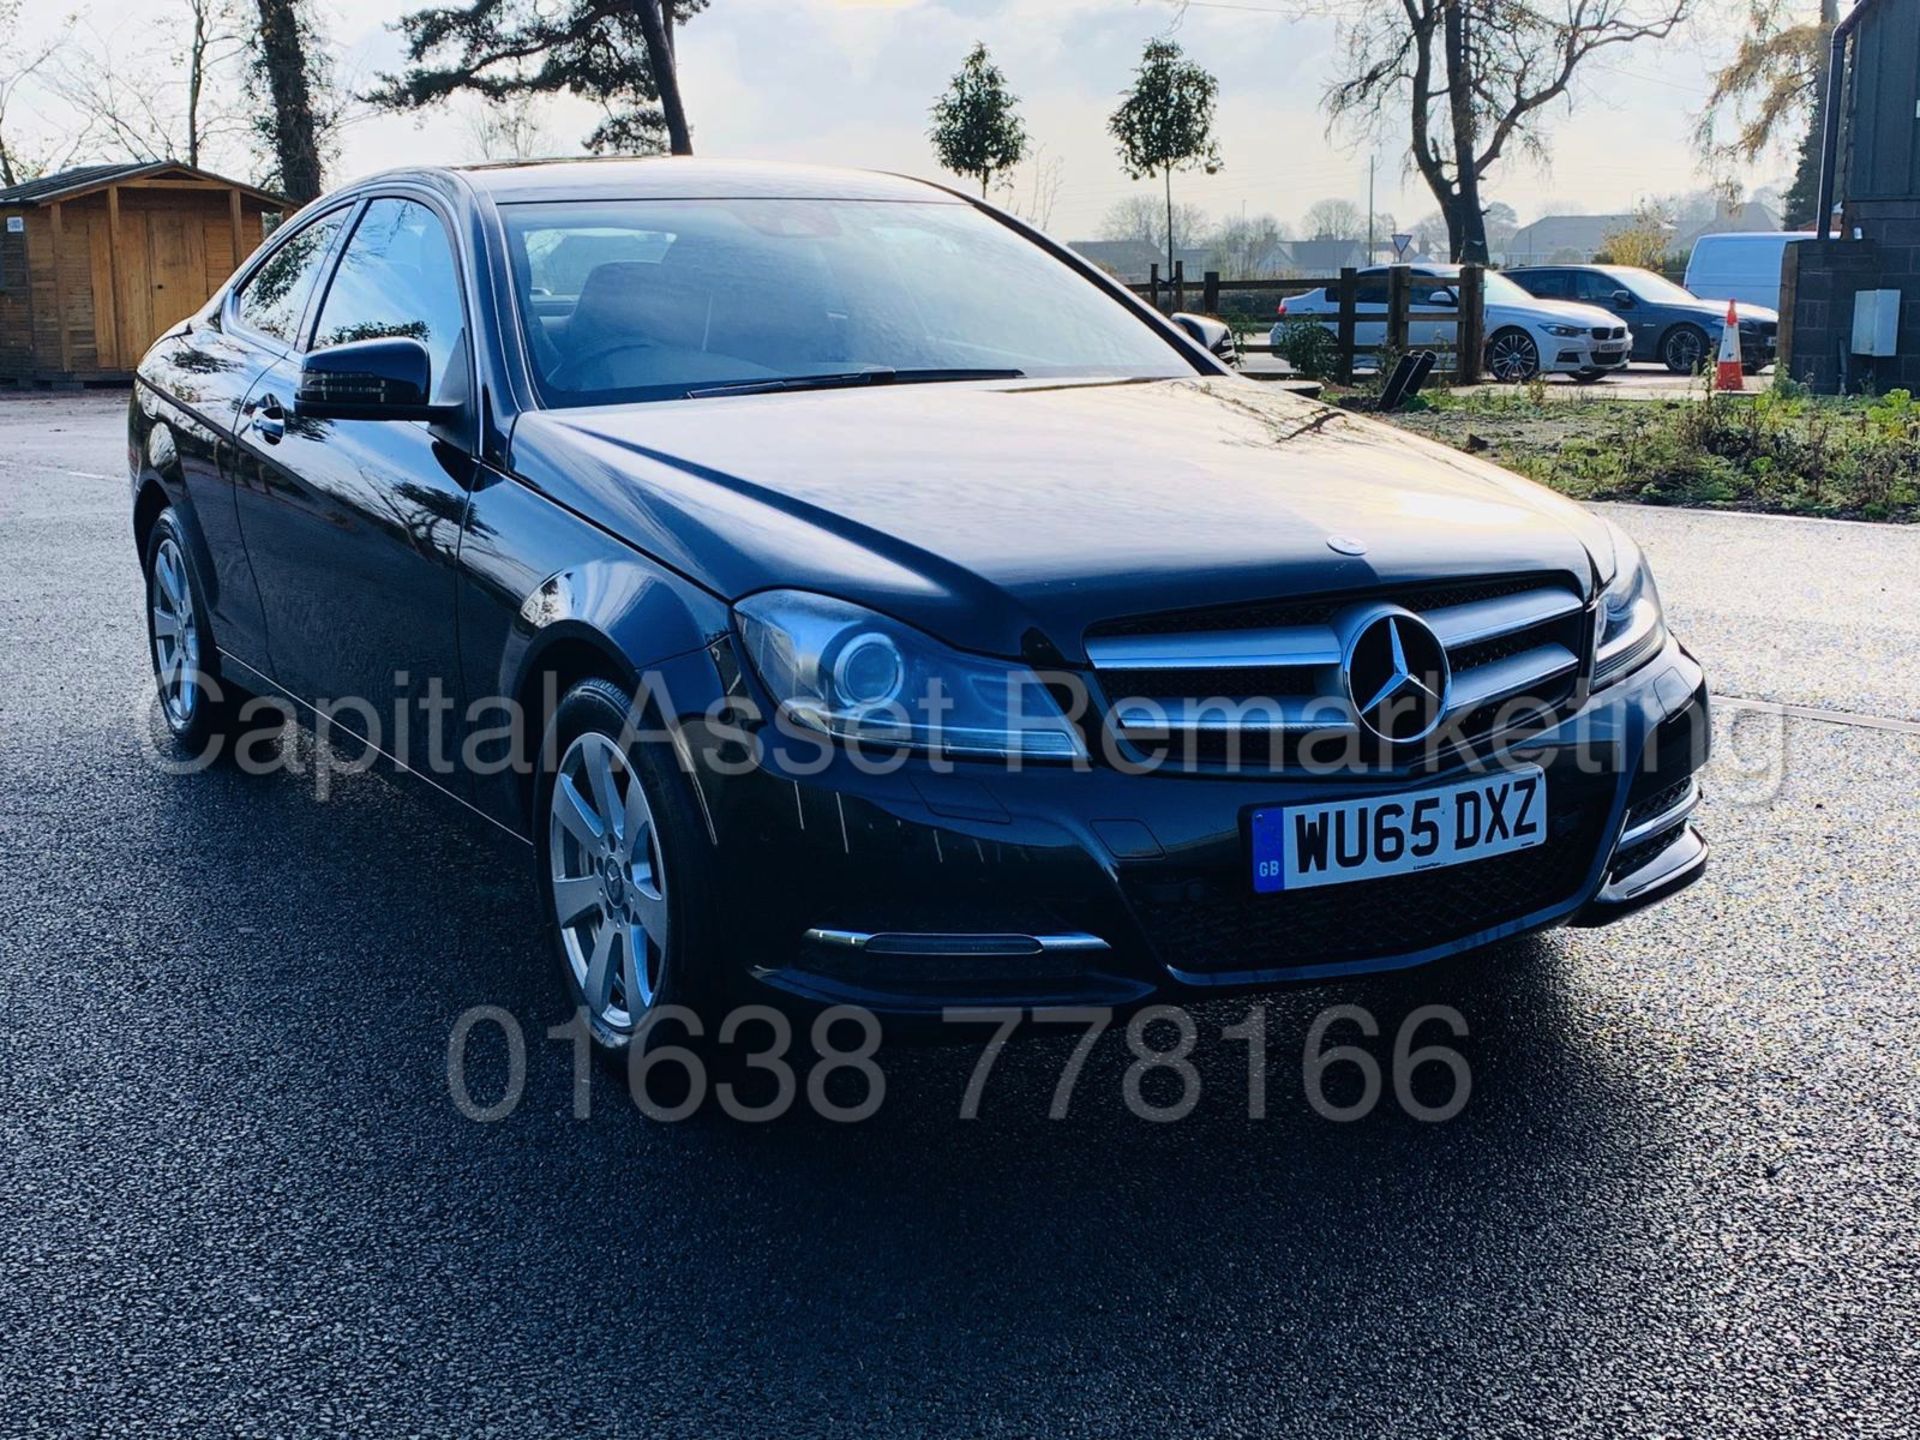 (On Sale) MERCEDES-BENZ C220 CDI *EXECUTIVE* COUPE VERSION (65 REG) **MASSIVE SPEC** (FULL HISTORY) - Image 2 of 42